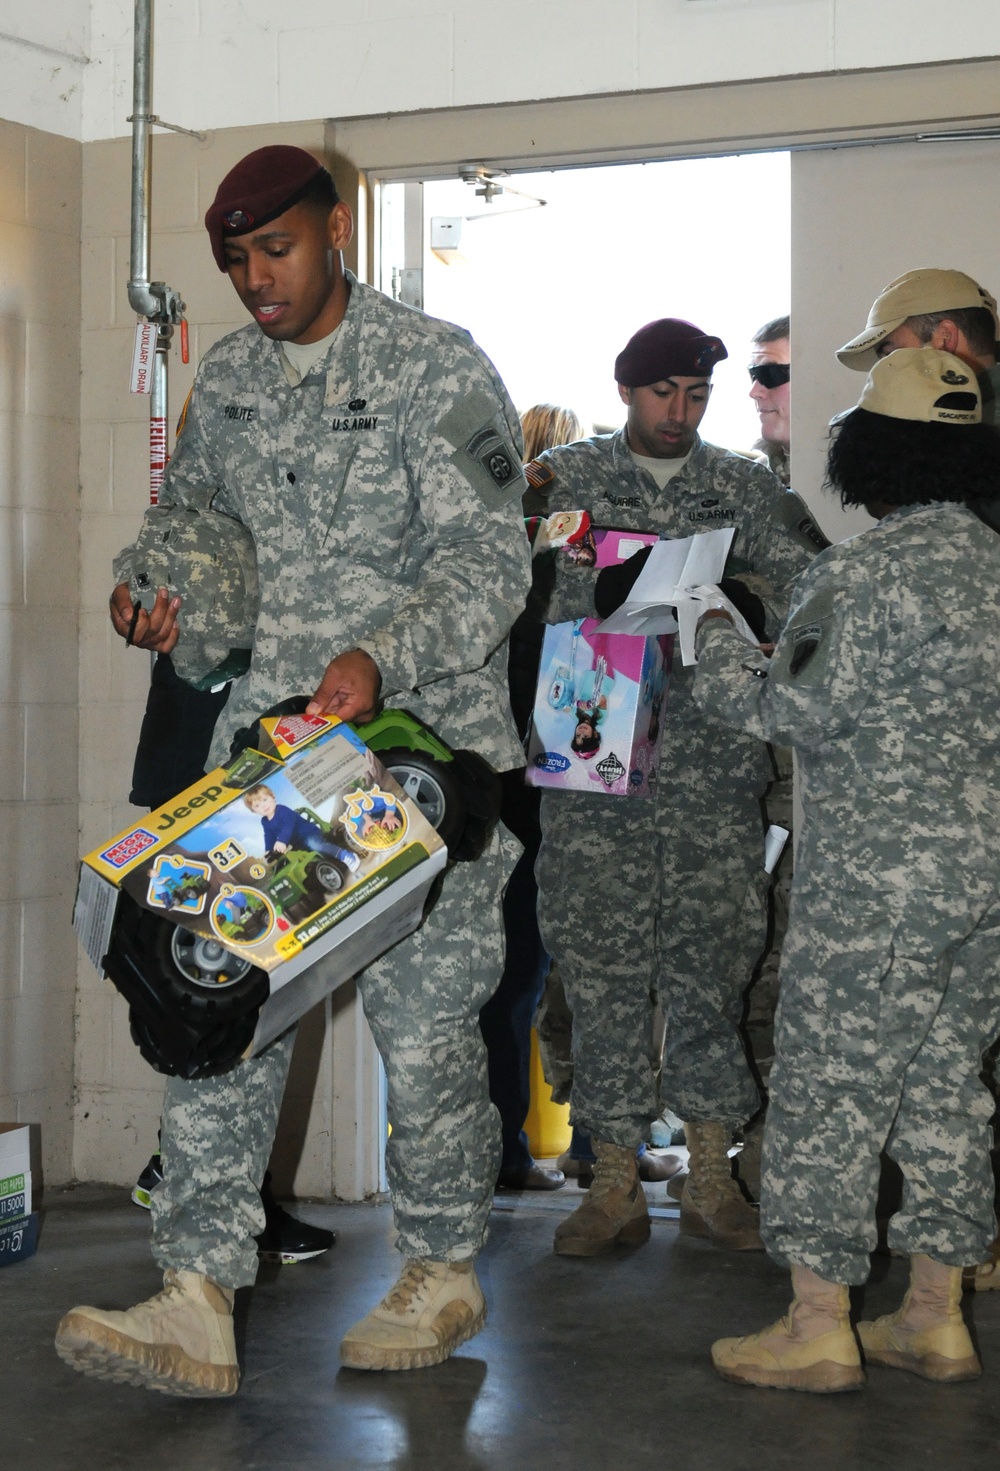 Operation Toy Drop: Bringing the community together